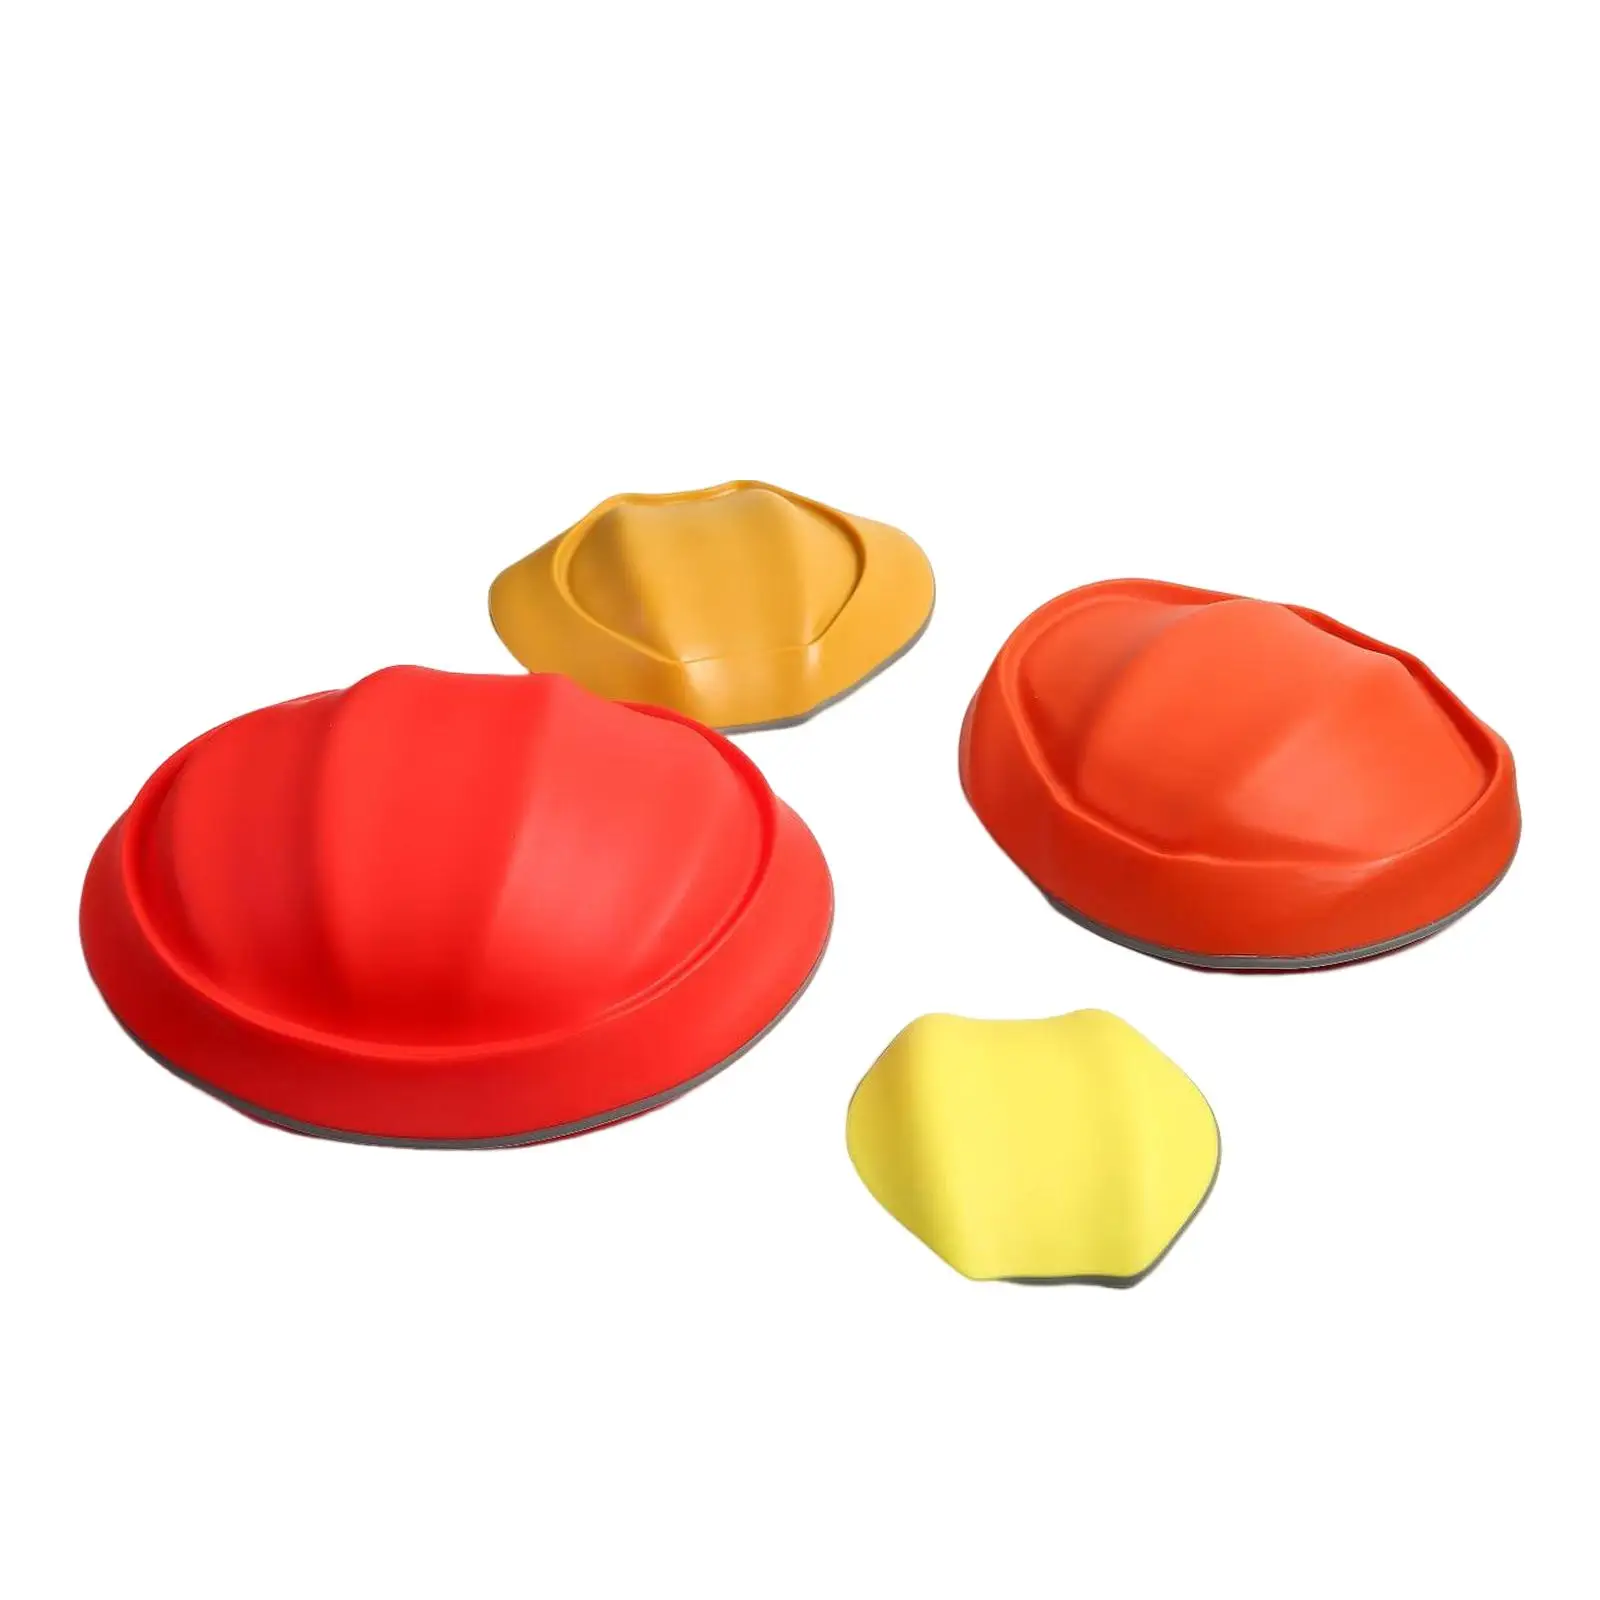 4Pcs Stepping Stones Sensory Toys Promotes Balance Coordination Balance River Stones for Ages over 3 Boys Family